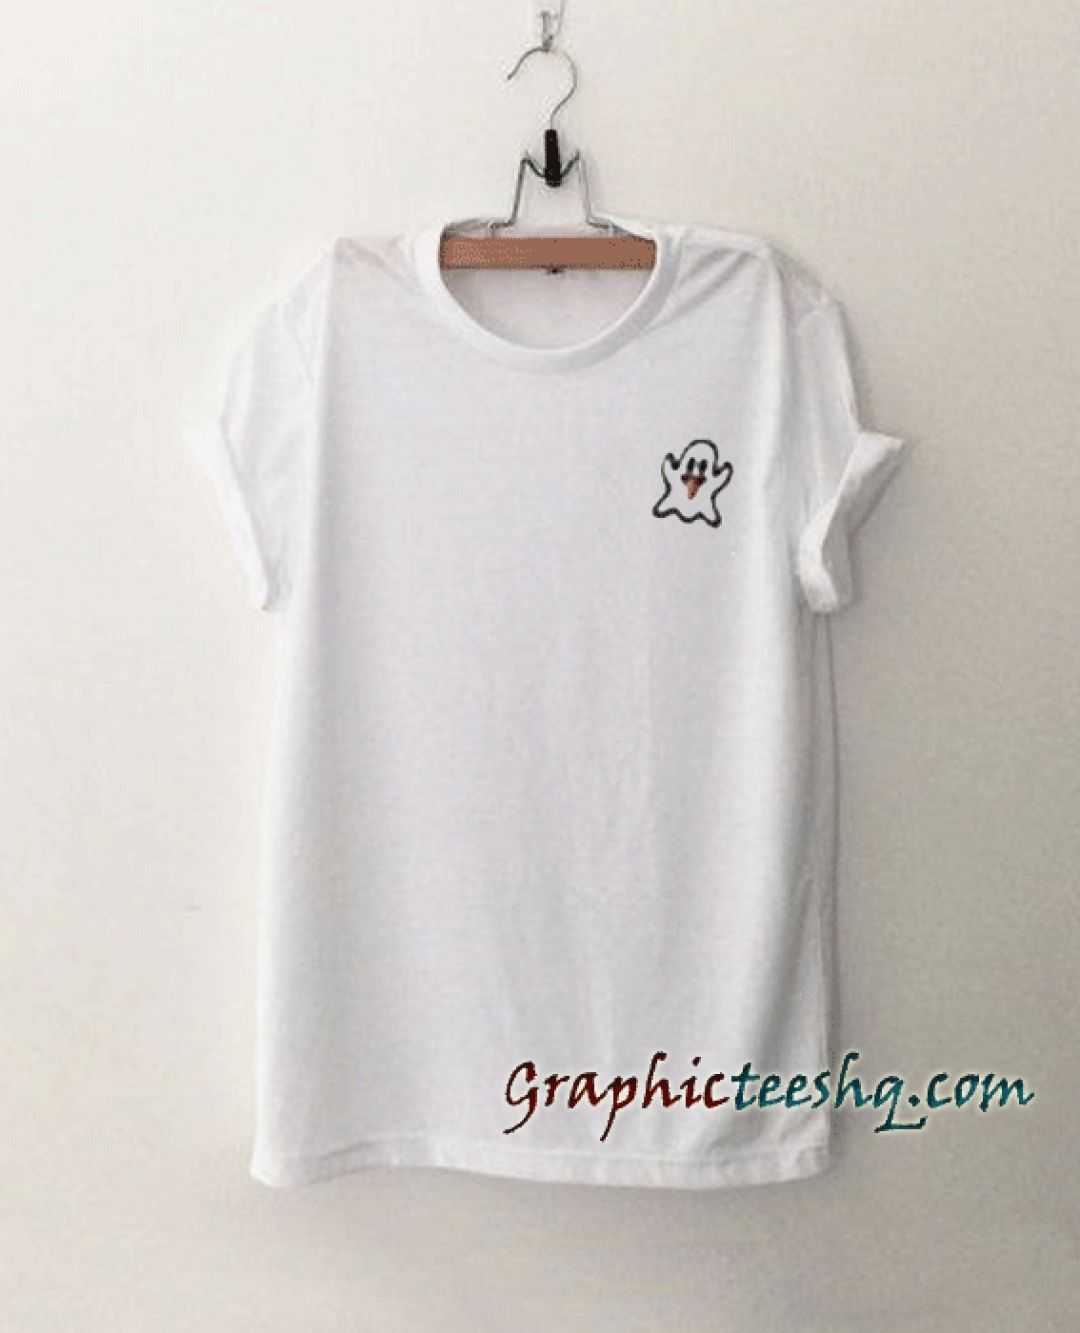 Funny little ghost tee shirt for adult men and women. It feels soft